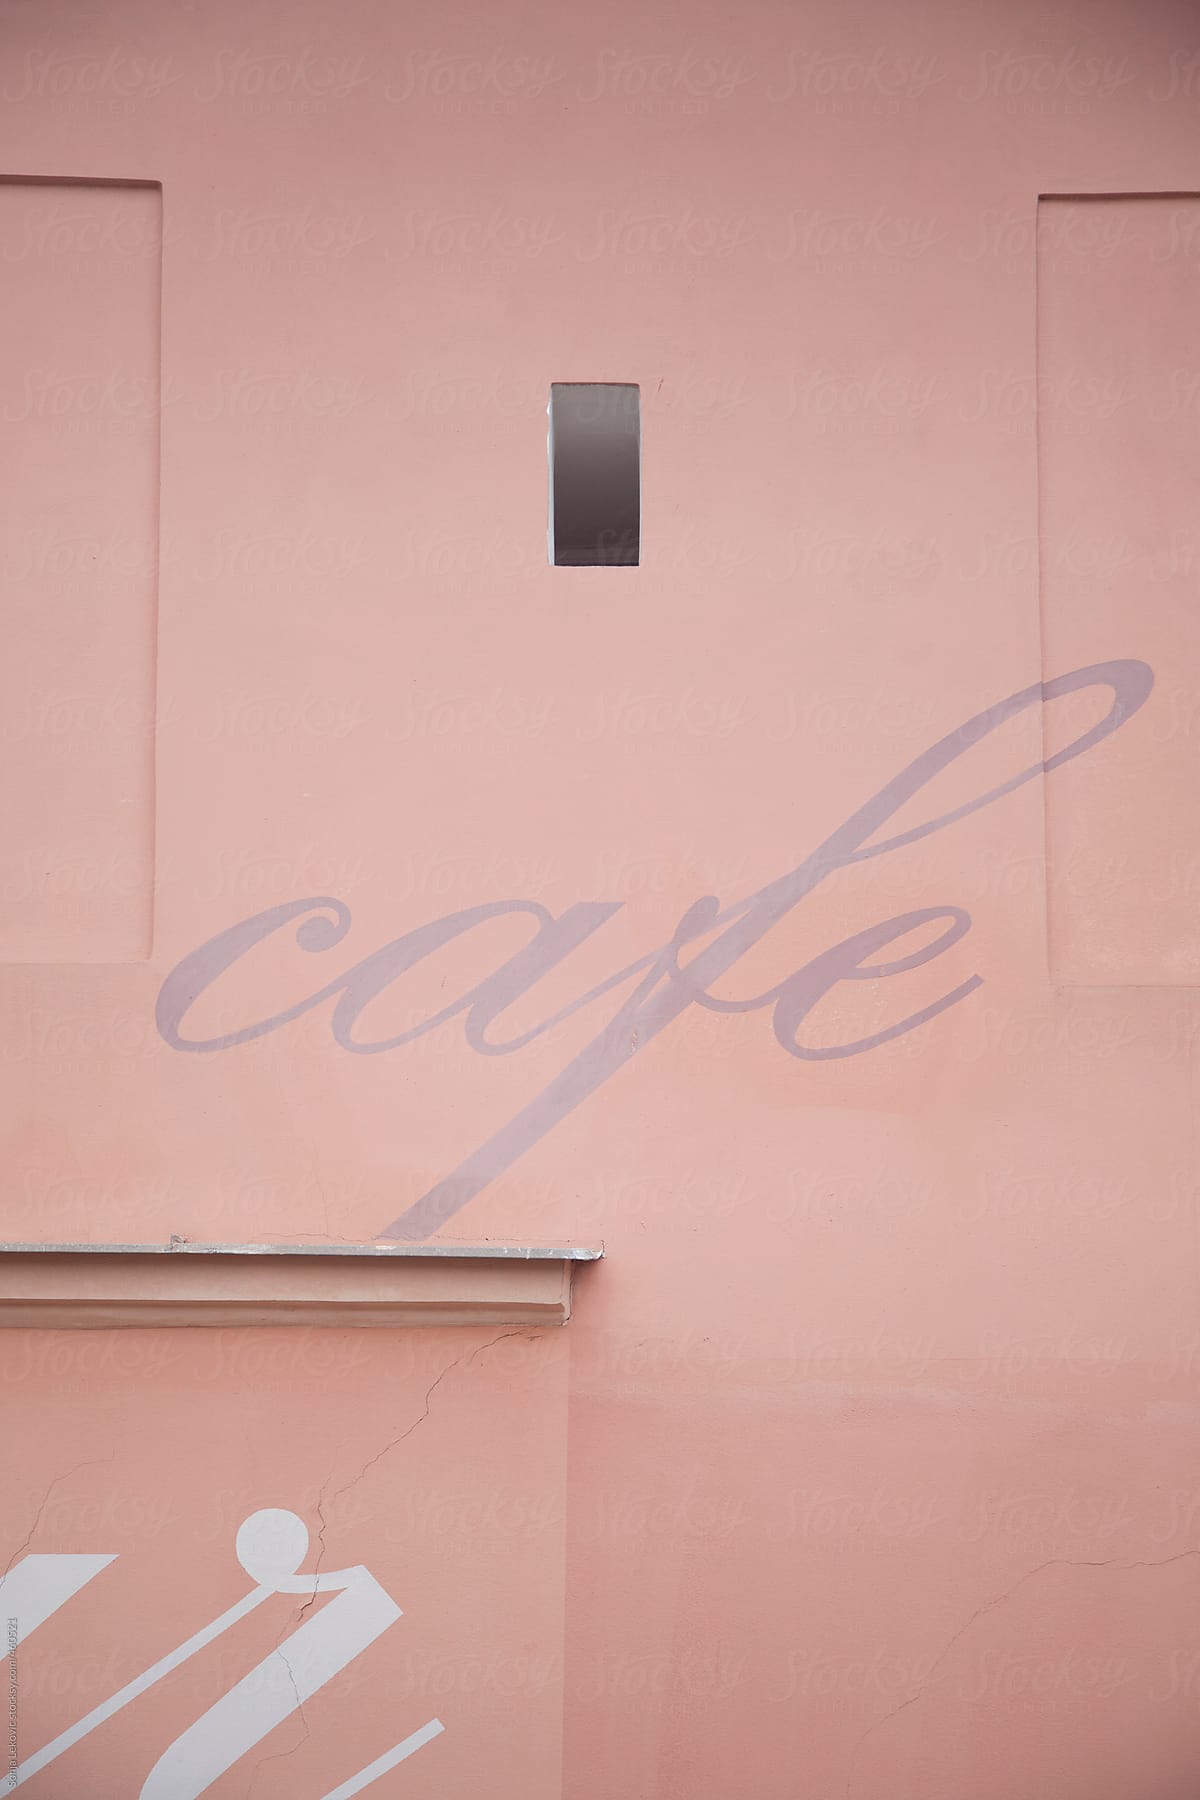 cafe sign on a pink building wall